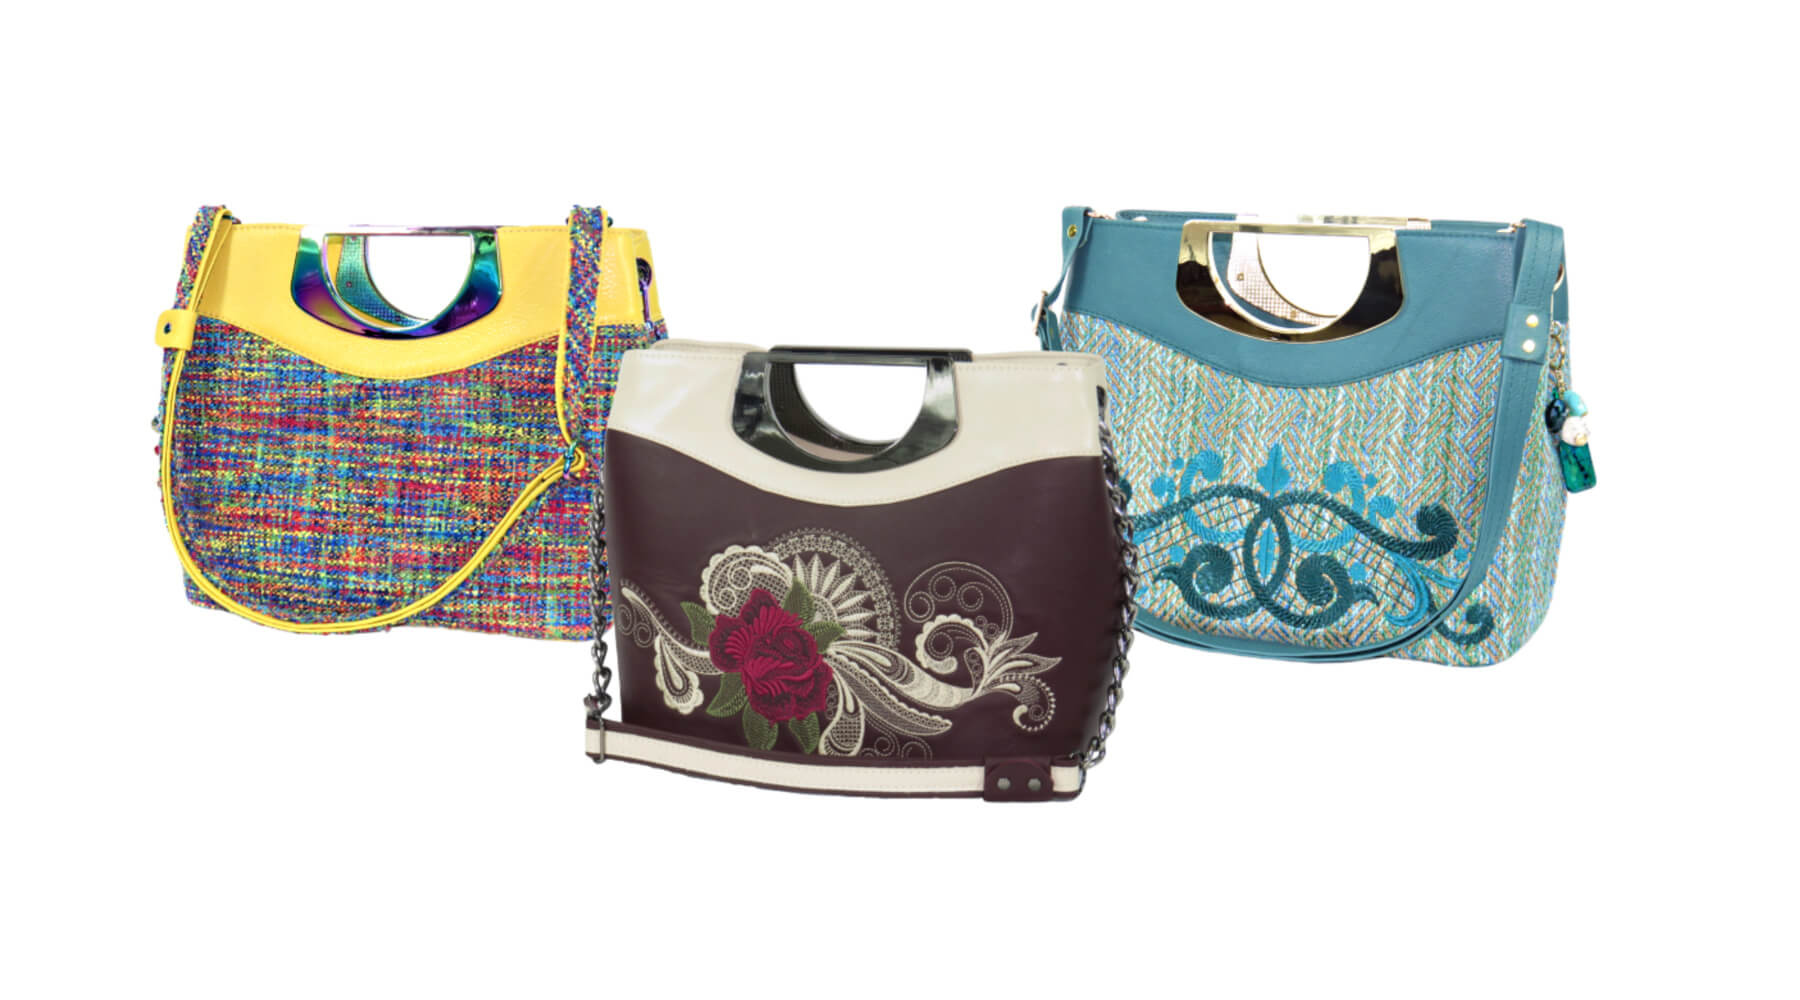 Fifth Avenue Leather and Tapestry Handbags made in USA